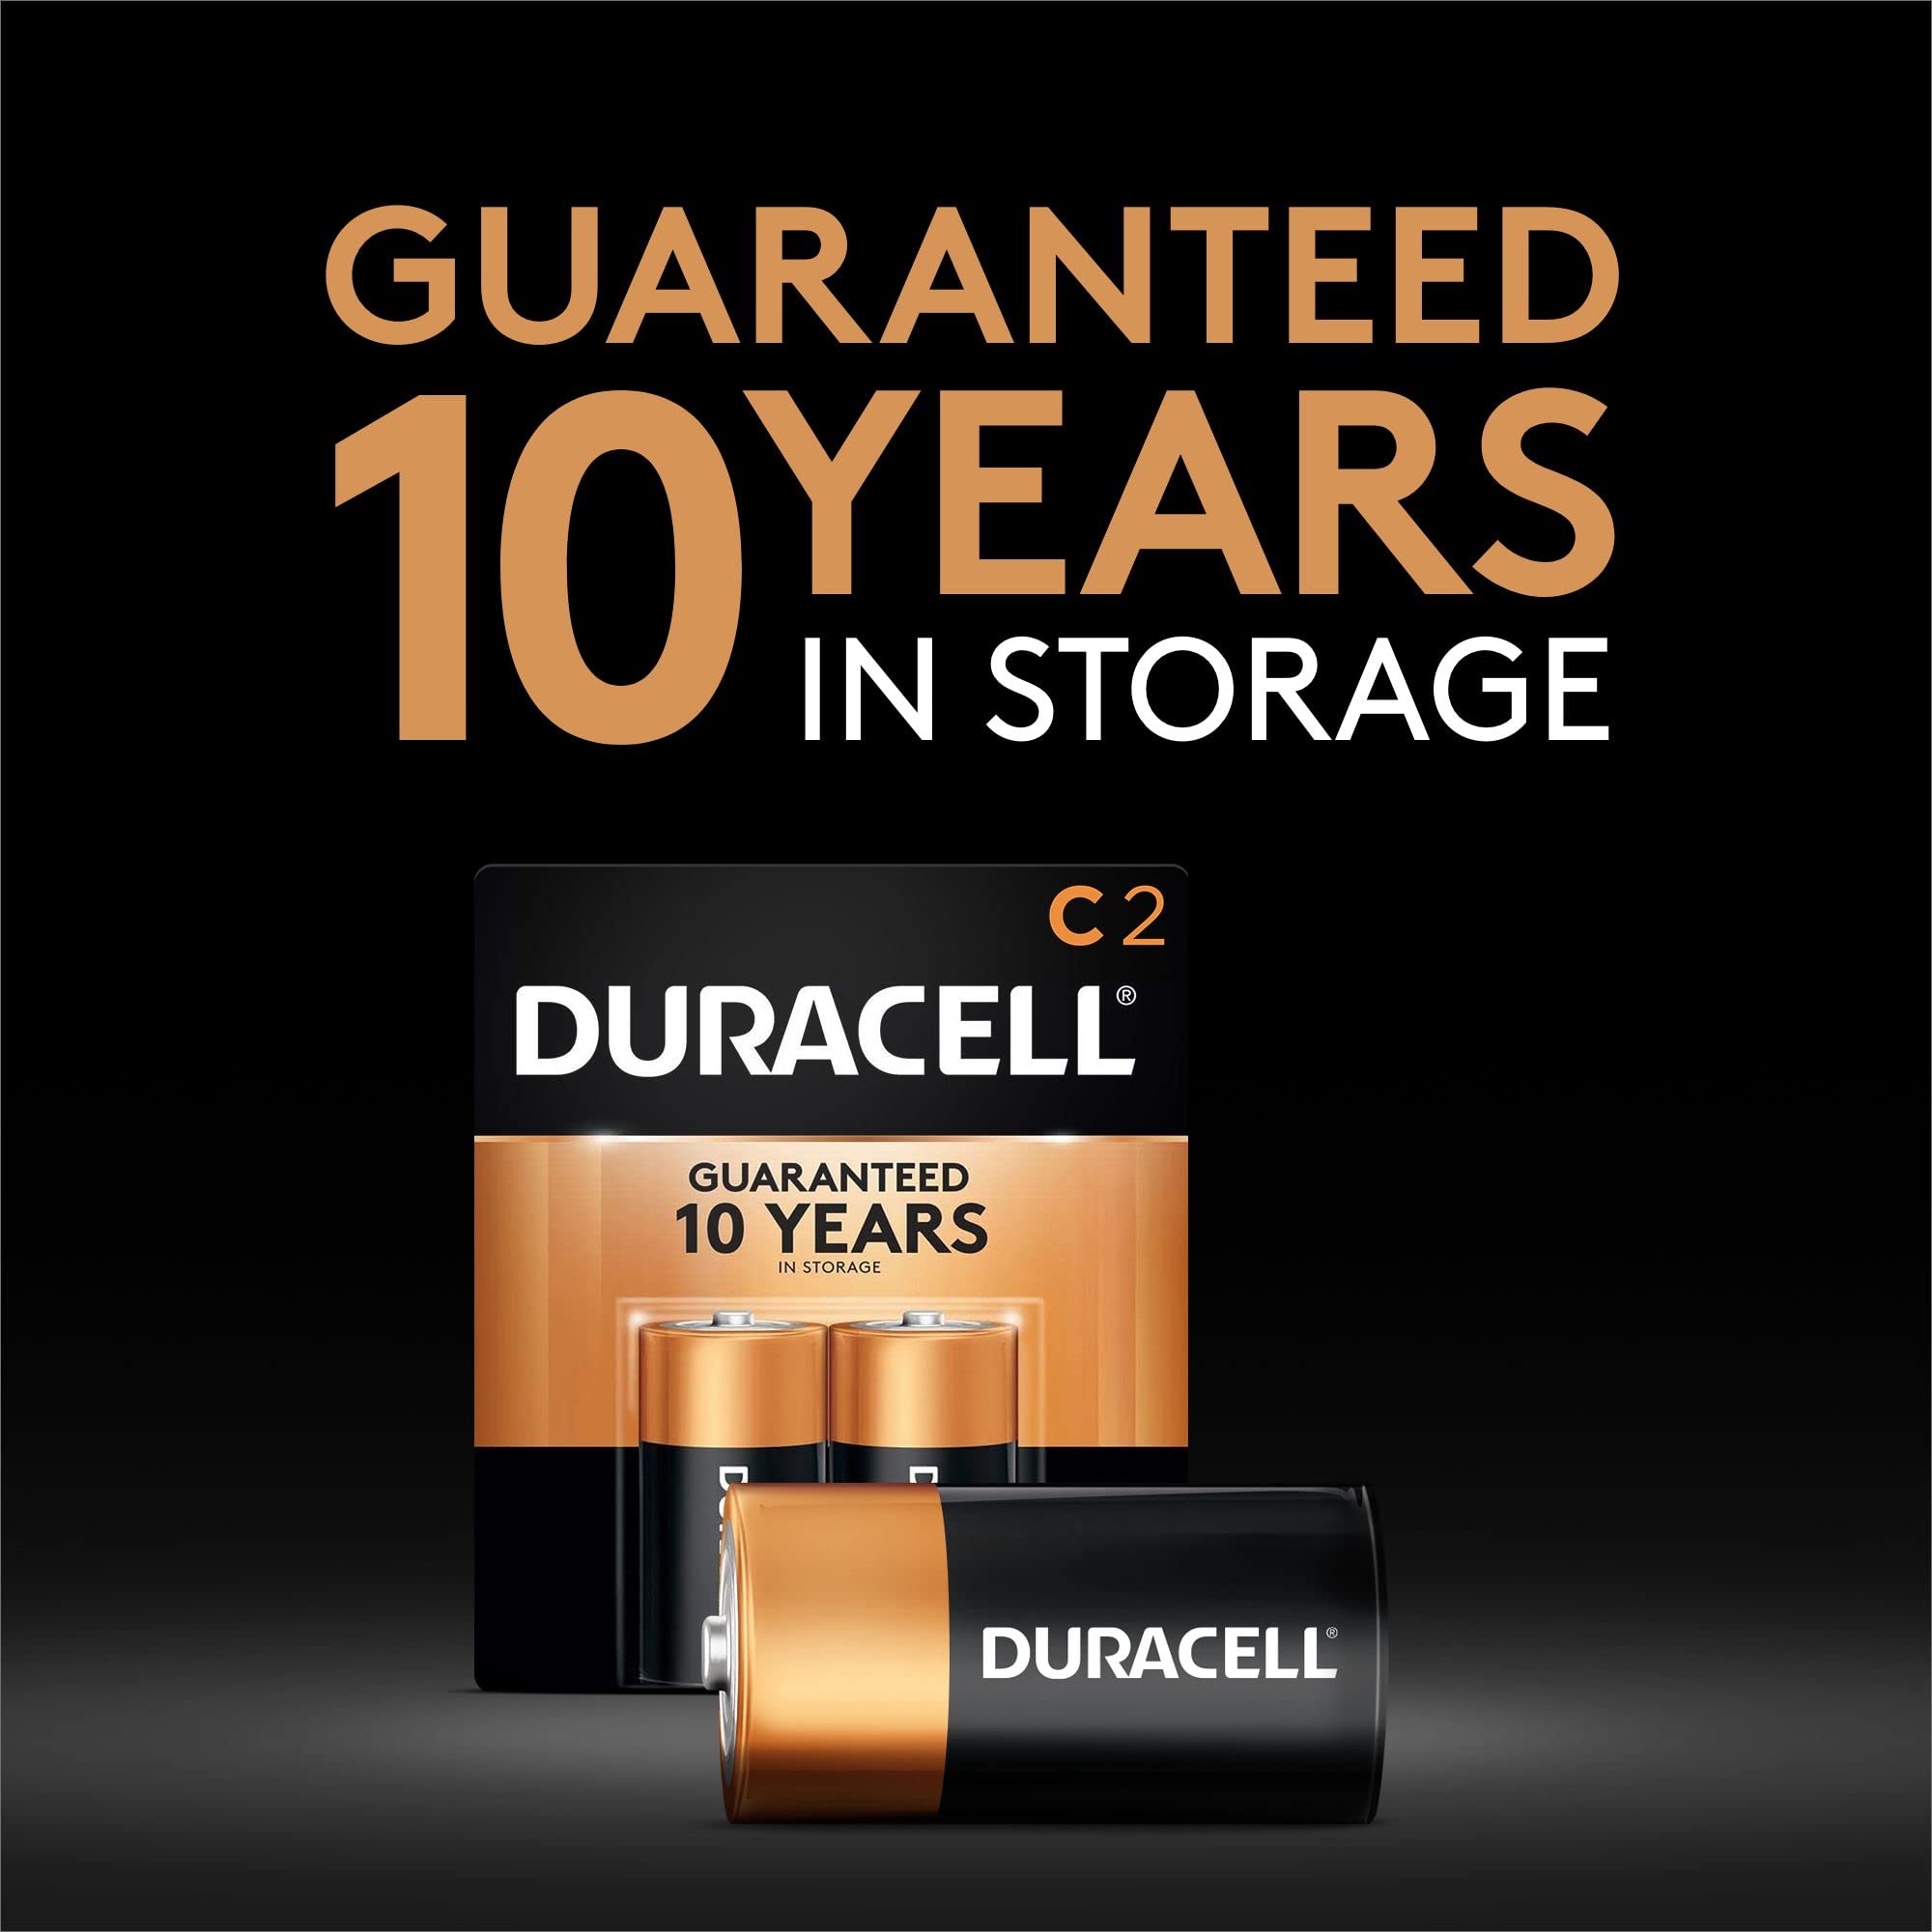 DURACELL Coppertop 1.5V Size C Alkaline Battery, (Pack of 18) - image 3 of 5